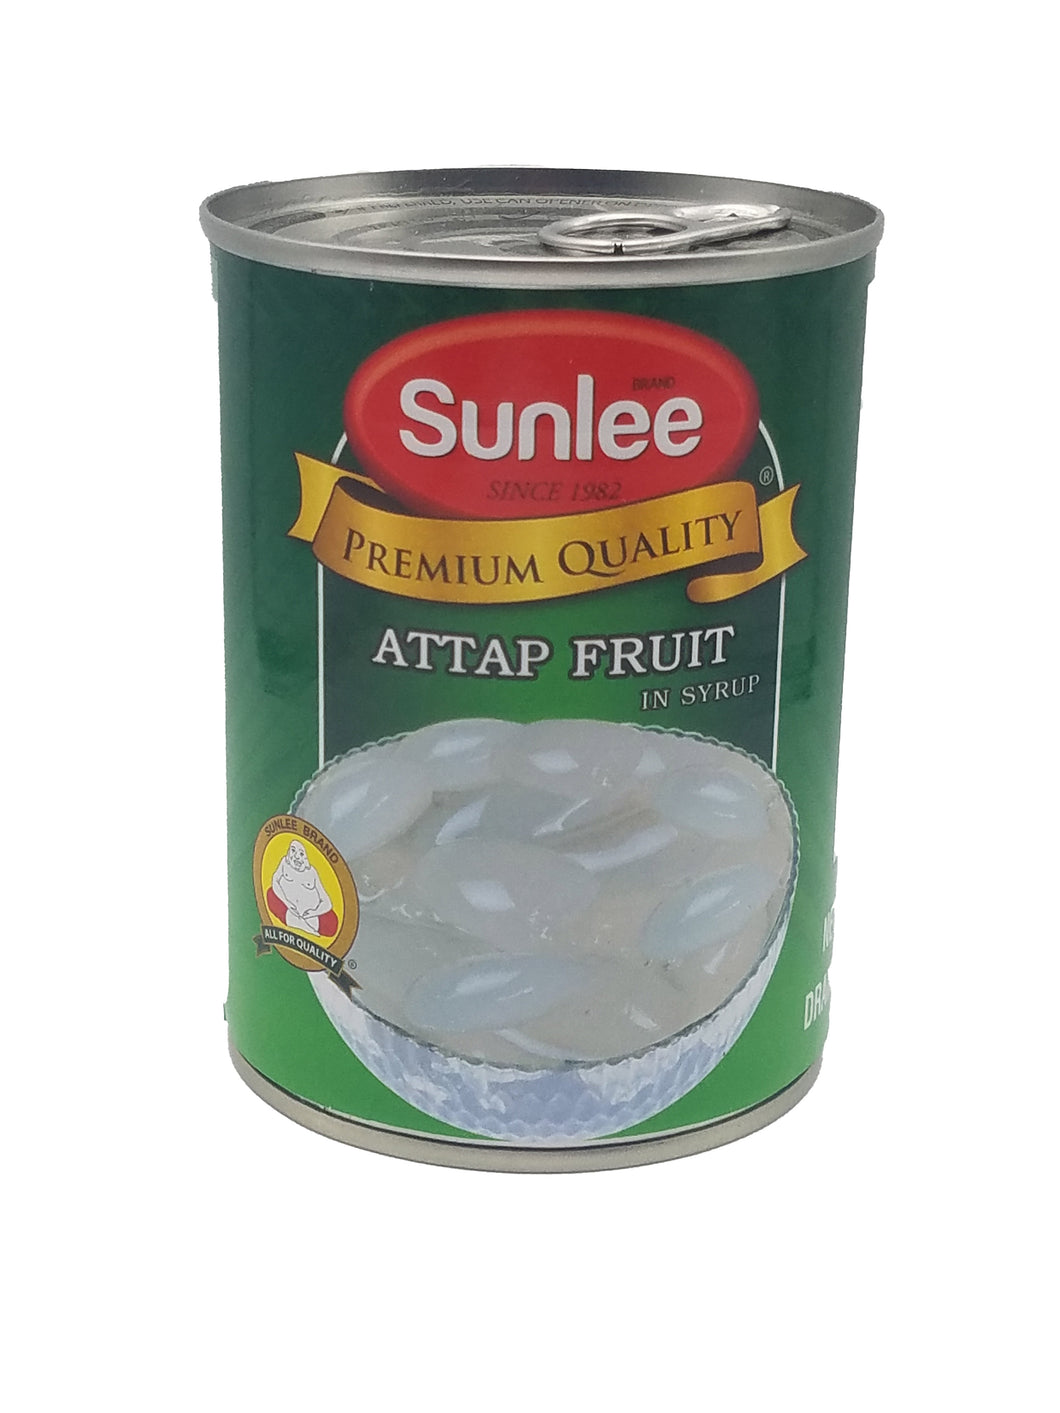 Sunlee Attap Fruit in Syrup (Palm Seeds)